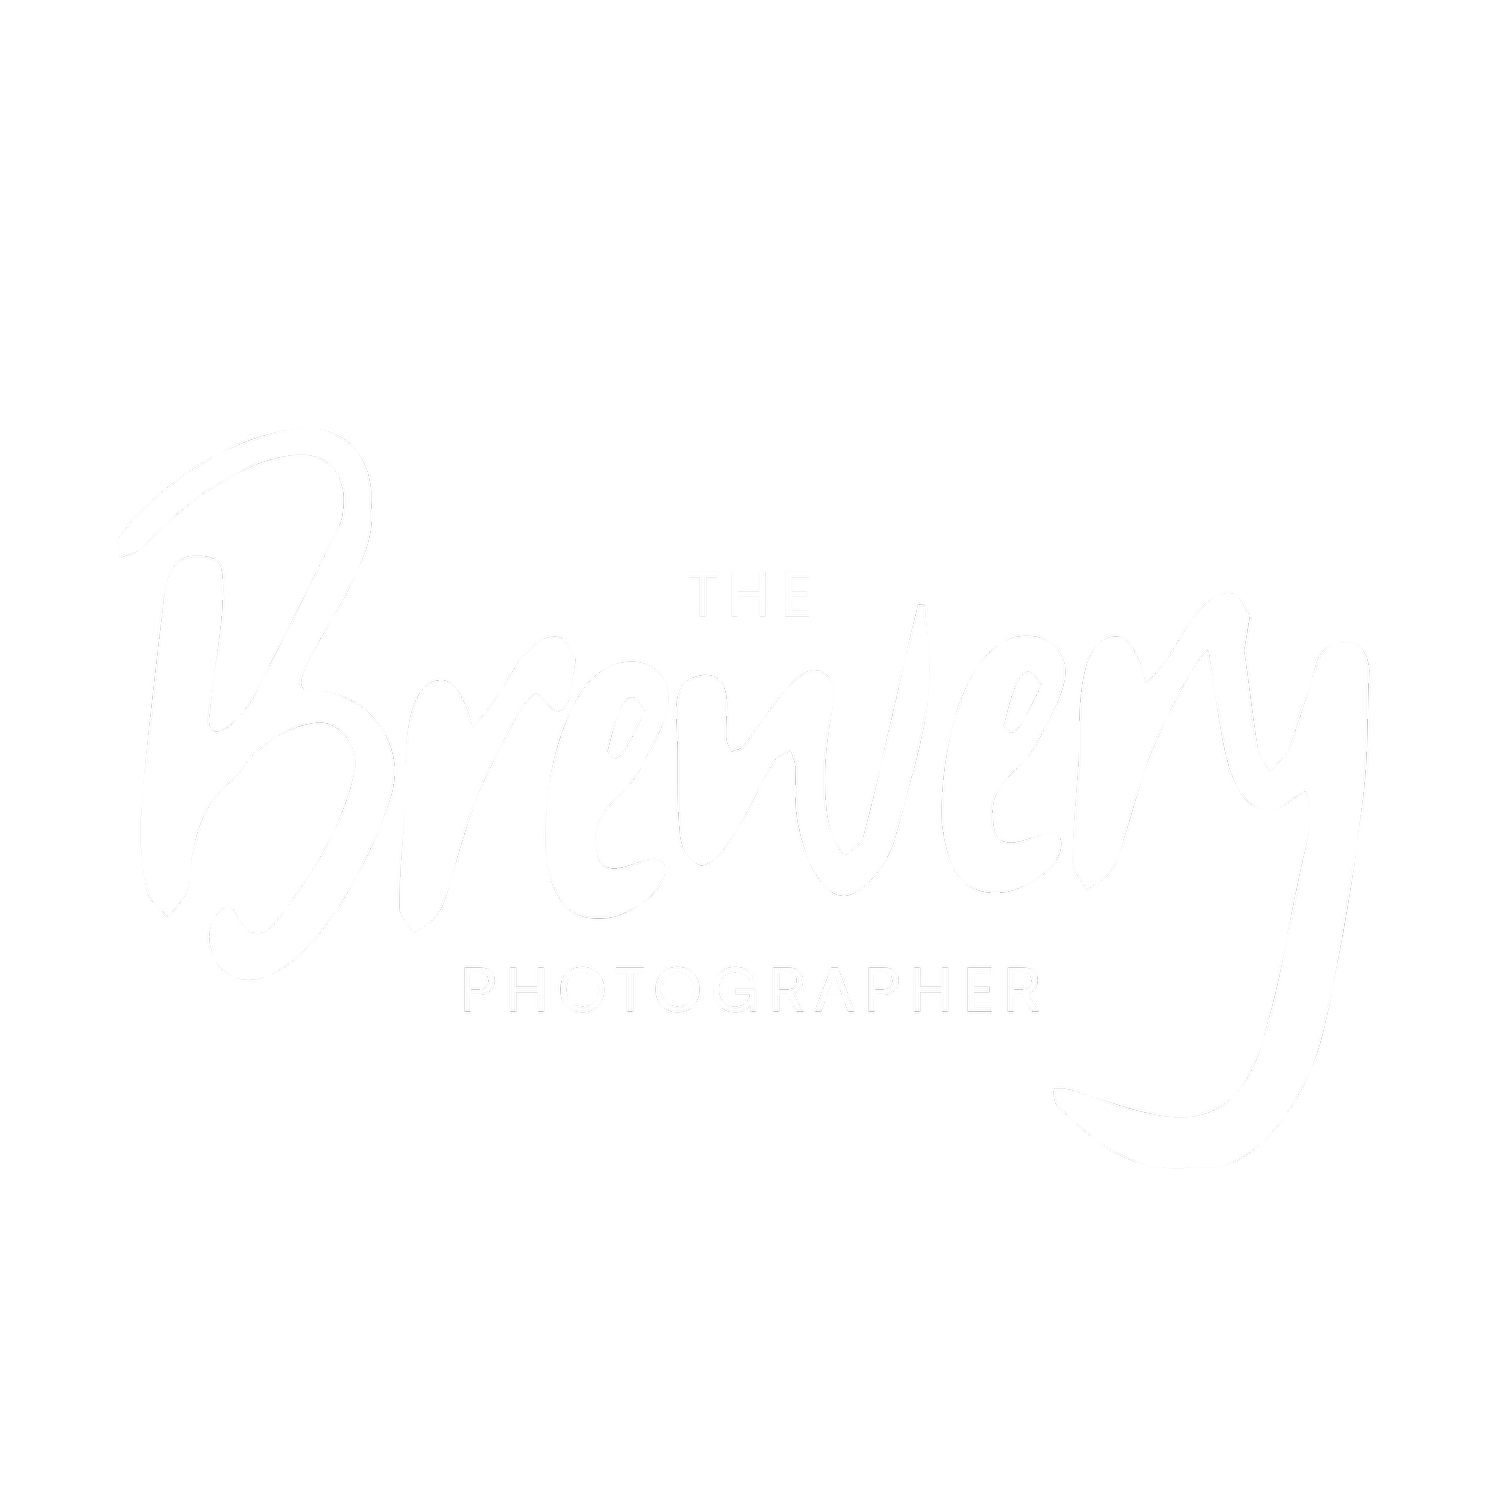 THE BREWERY PHOTOGRAPHER